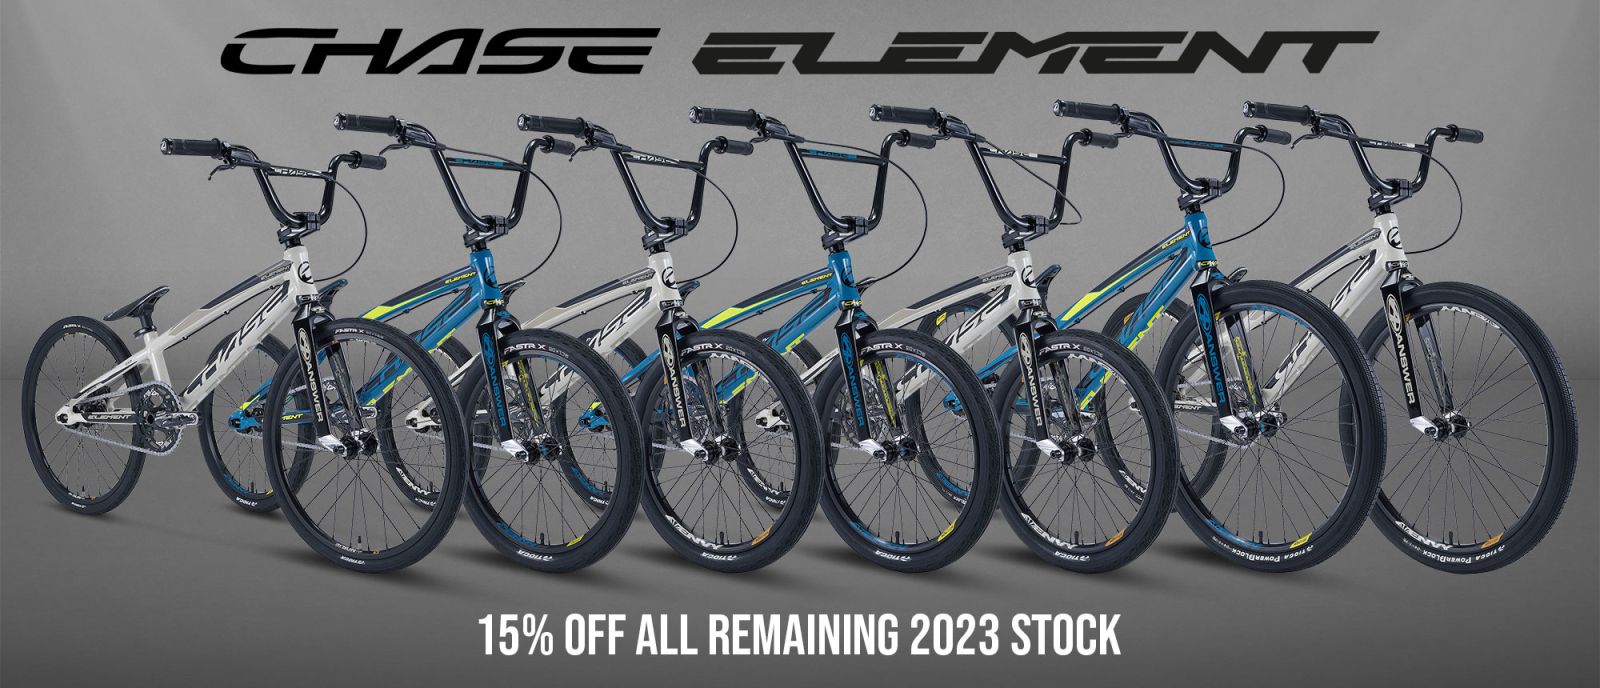 Chase Elements - 15% off all remaining 2023 stock